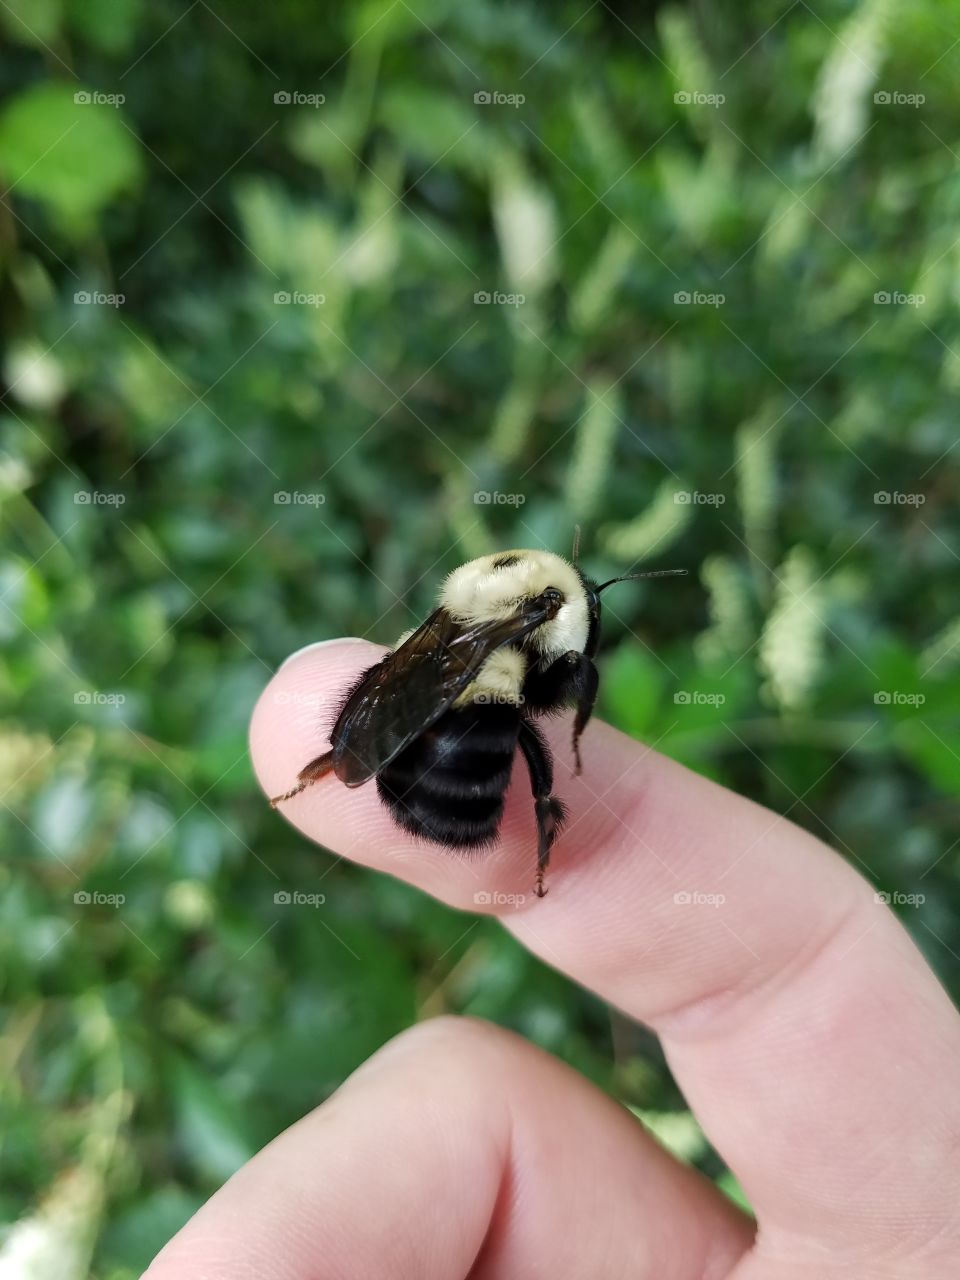 Bumble bee on finger